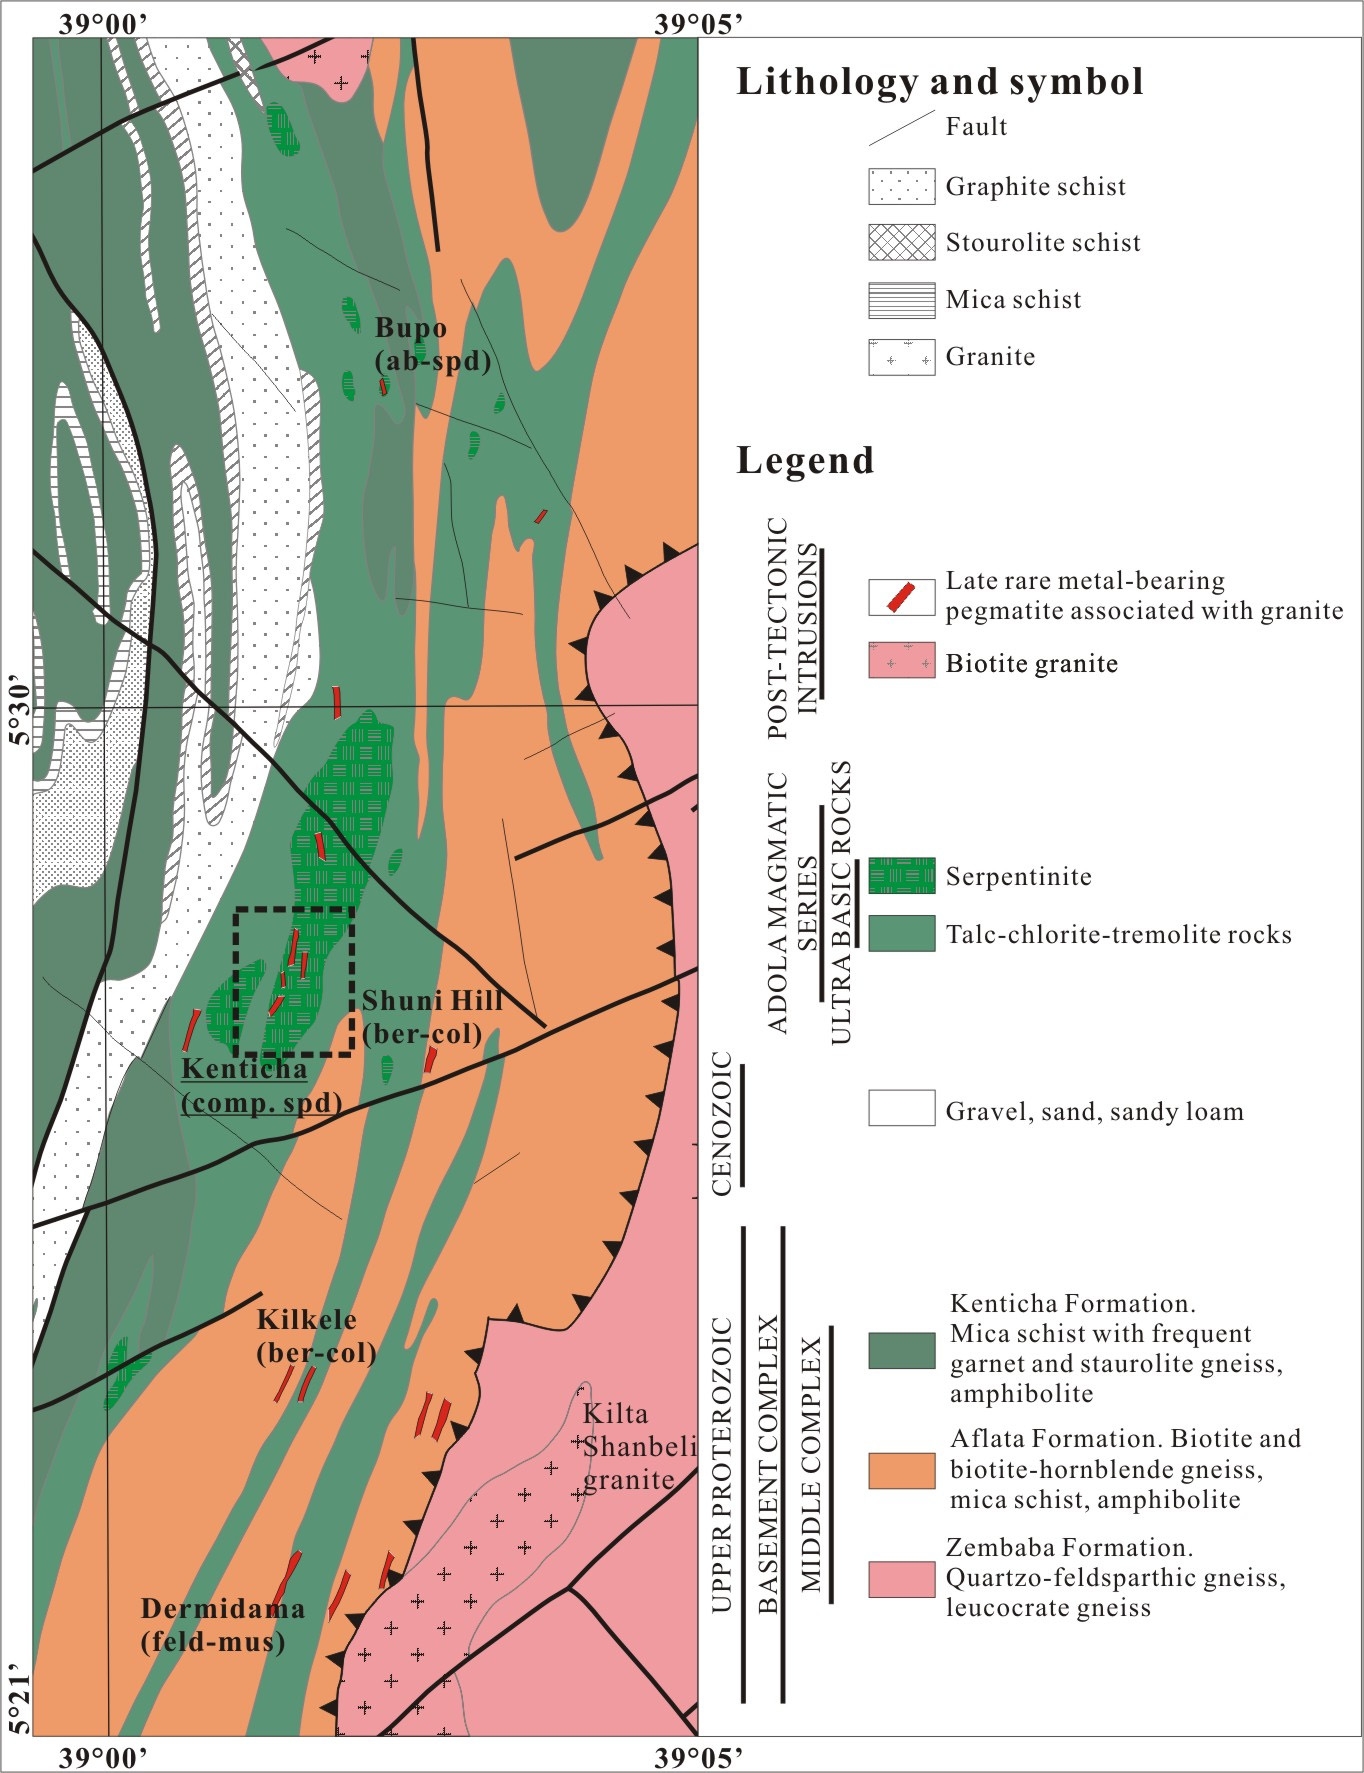 Fig. 1-5. The general geologic map showing the location of various pegmatites in Kenticha pegmatite field (after Ethiopian Mapping Agency, 1988).